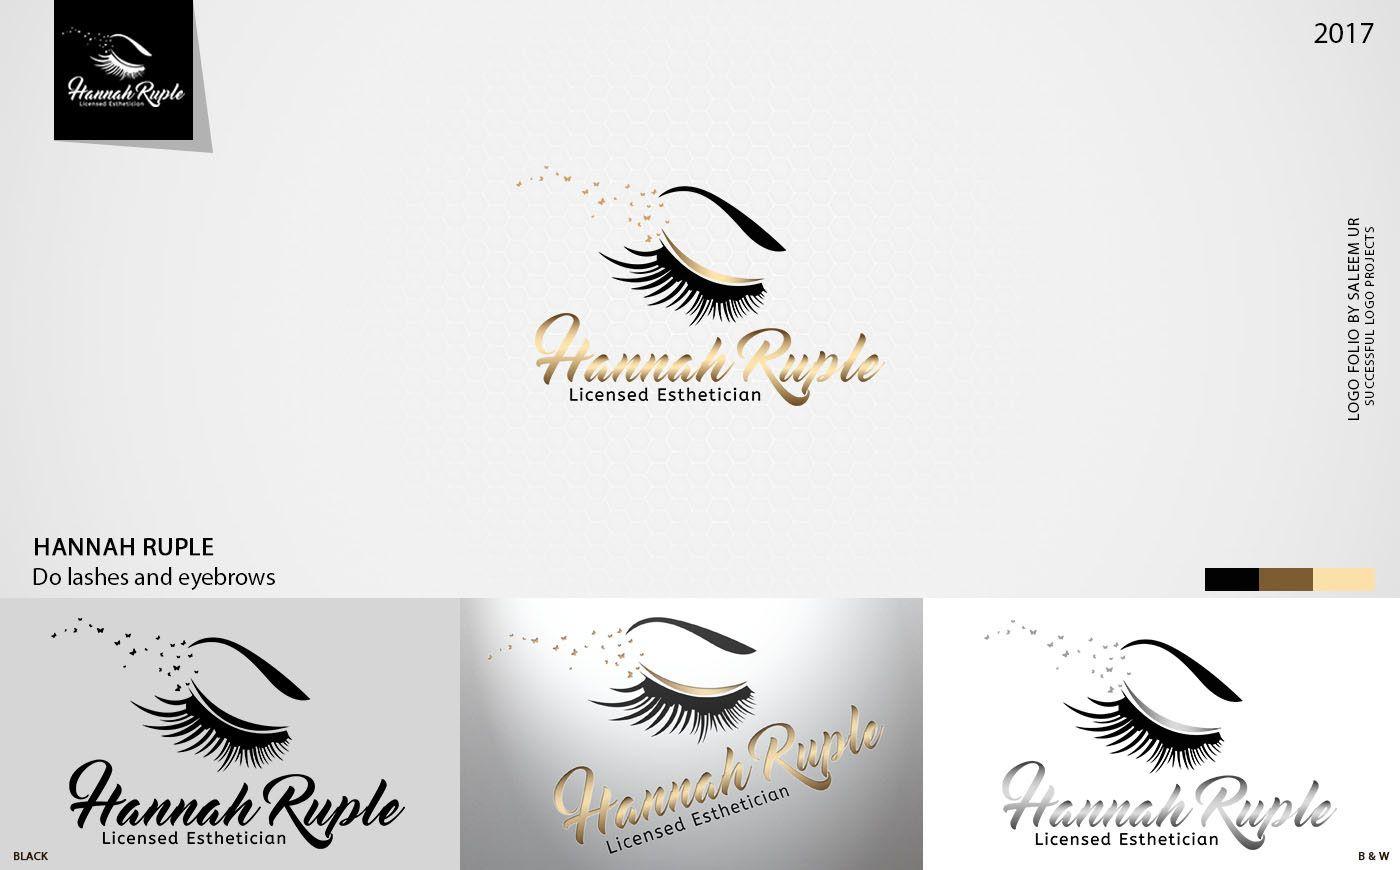 Esthetician Logo - Top's 10 Logo Design Projects For Client(Successful)